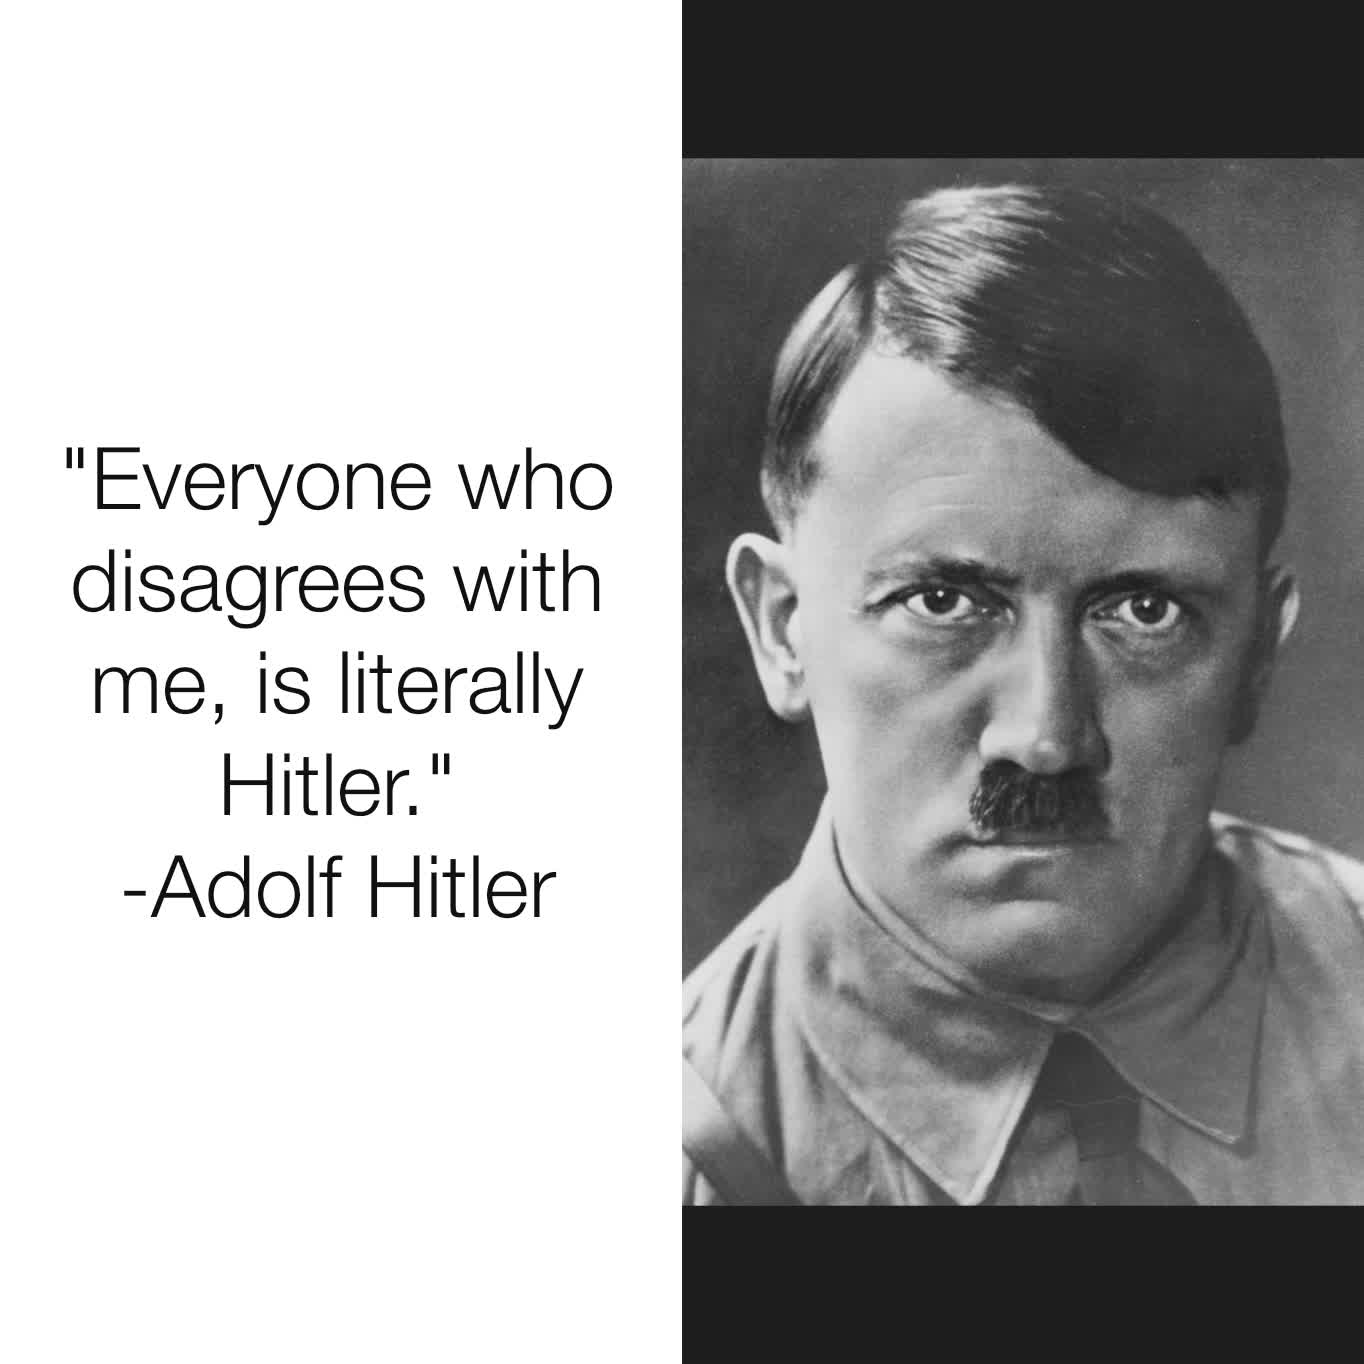 "Everyone who disagrees with me, is literally Hitler."
-Adolf Hitler